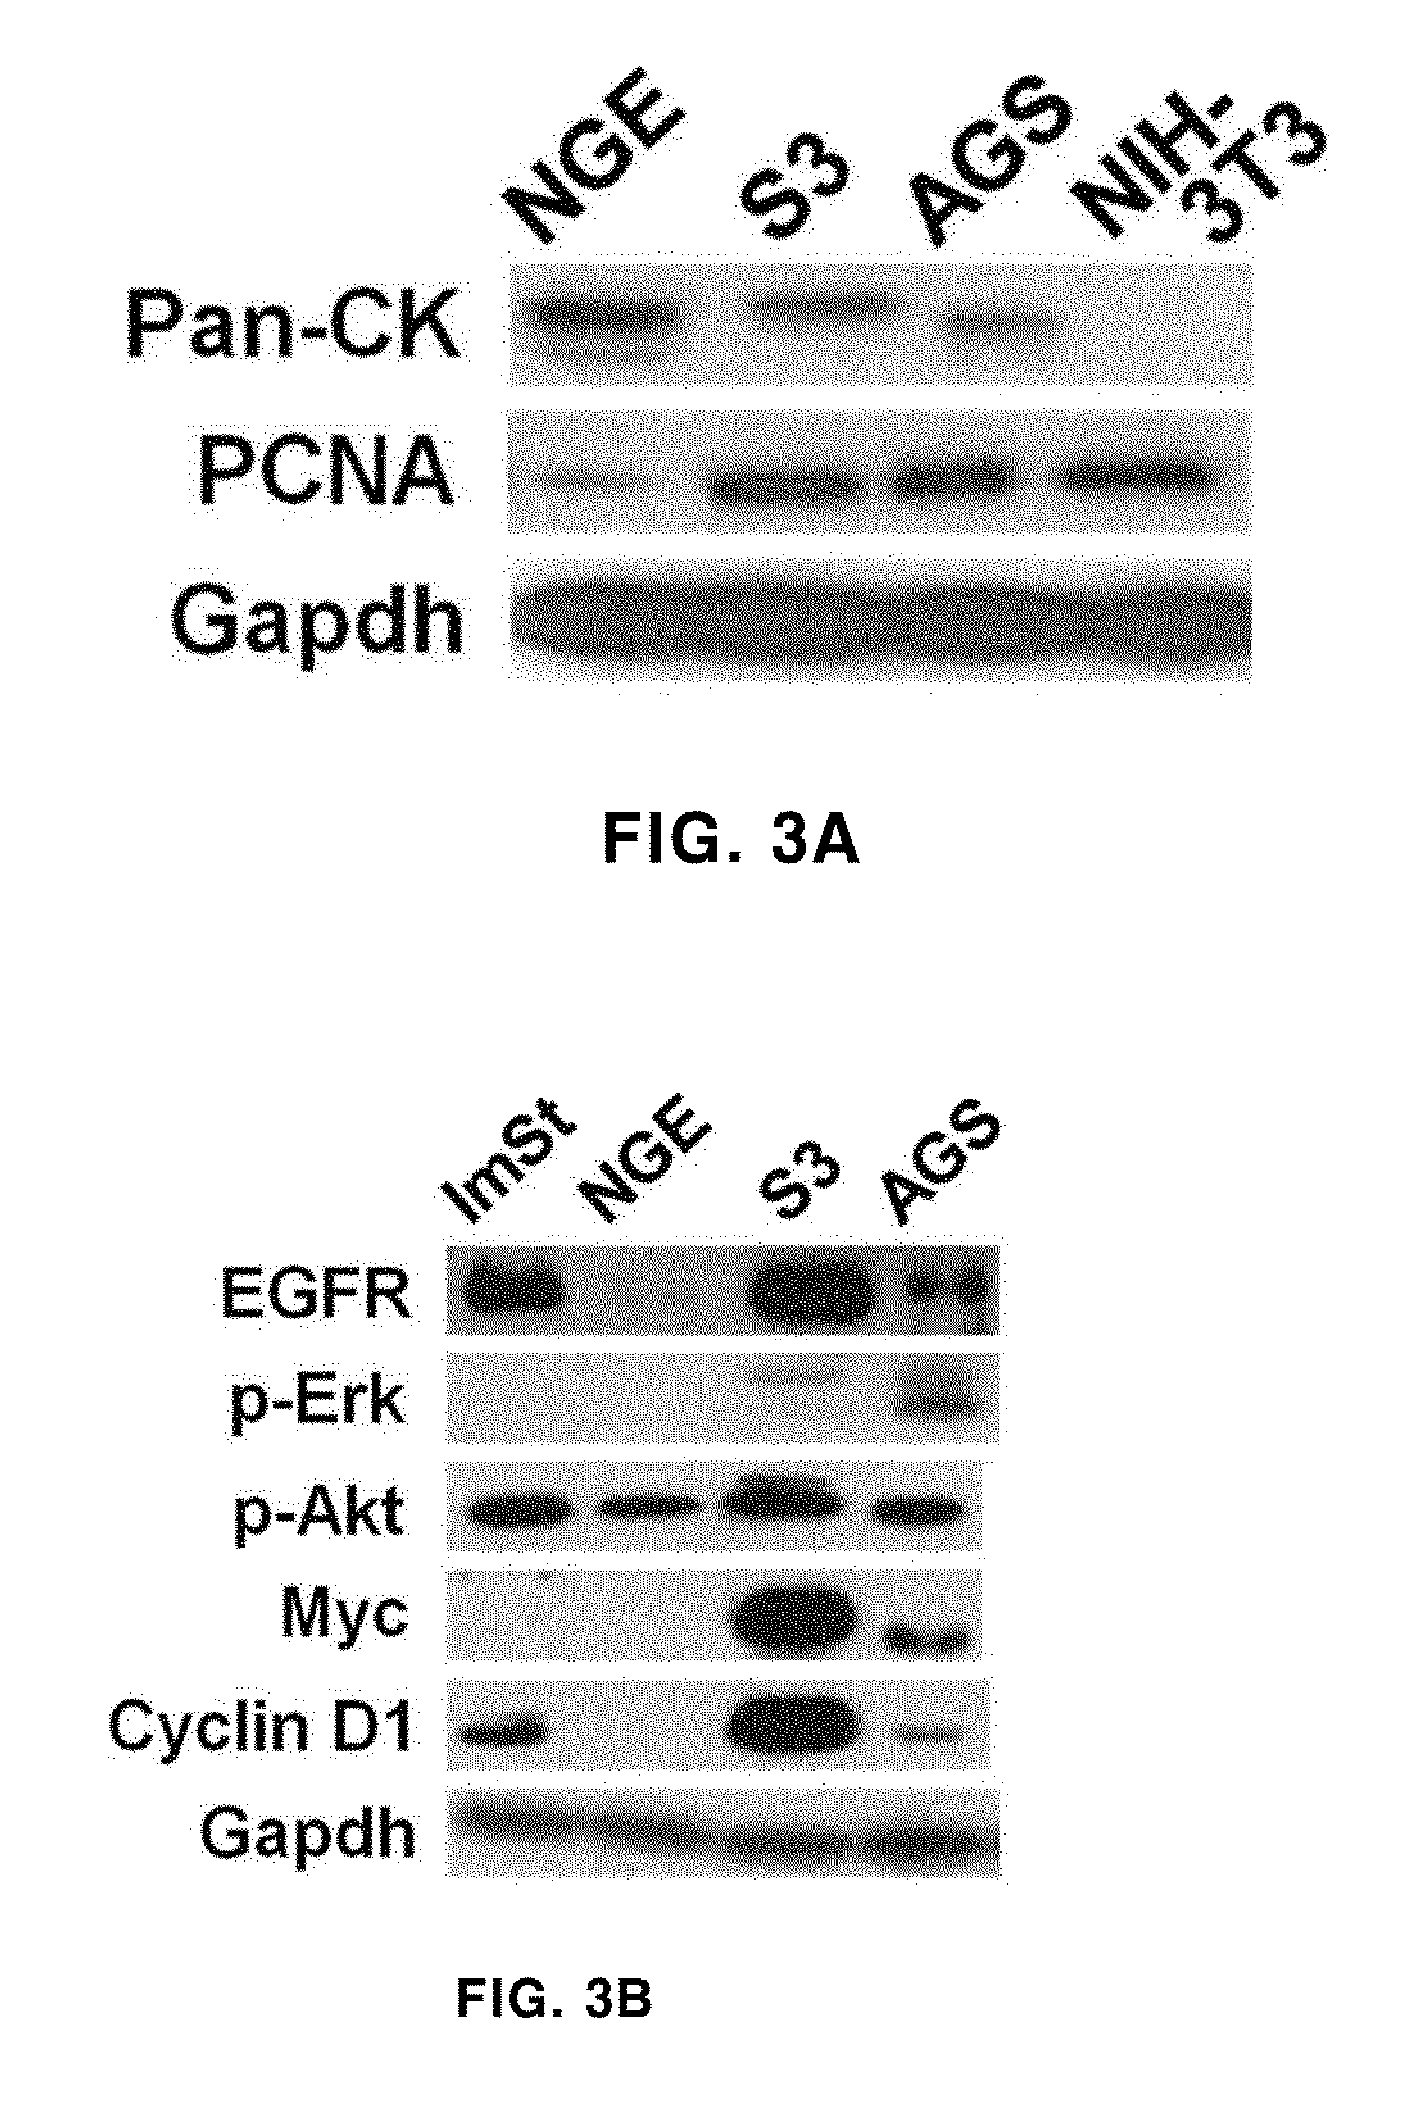 Gastric cancer cell line derived from murine gastric adenocarcinoma lacking p53 and e-cadherin and use thereof